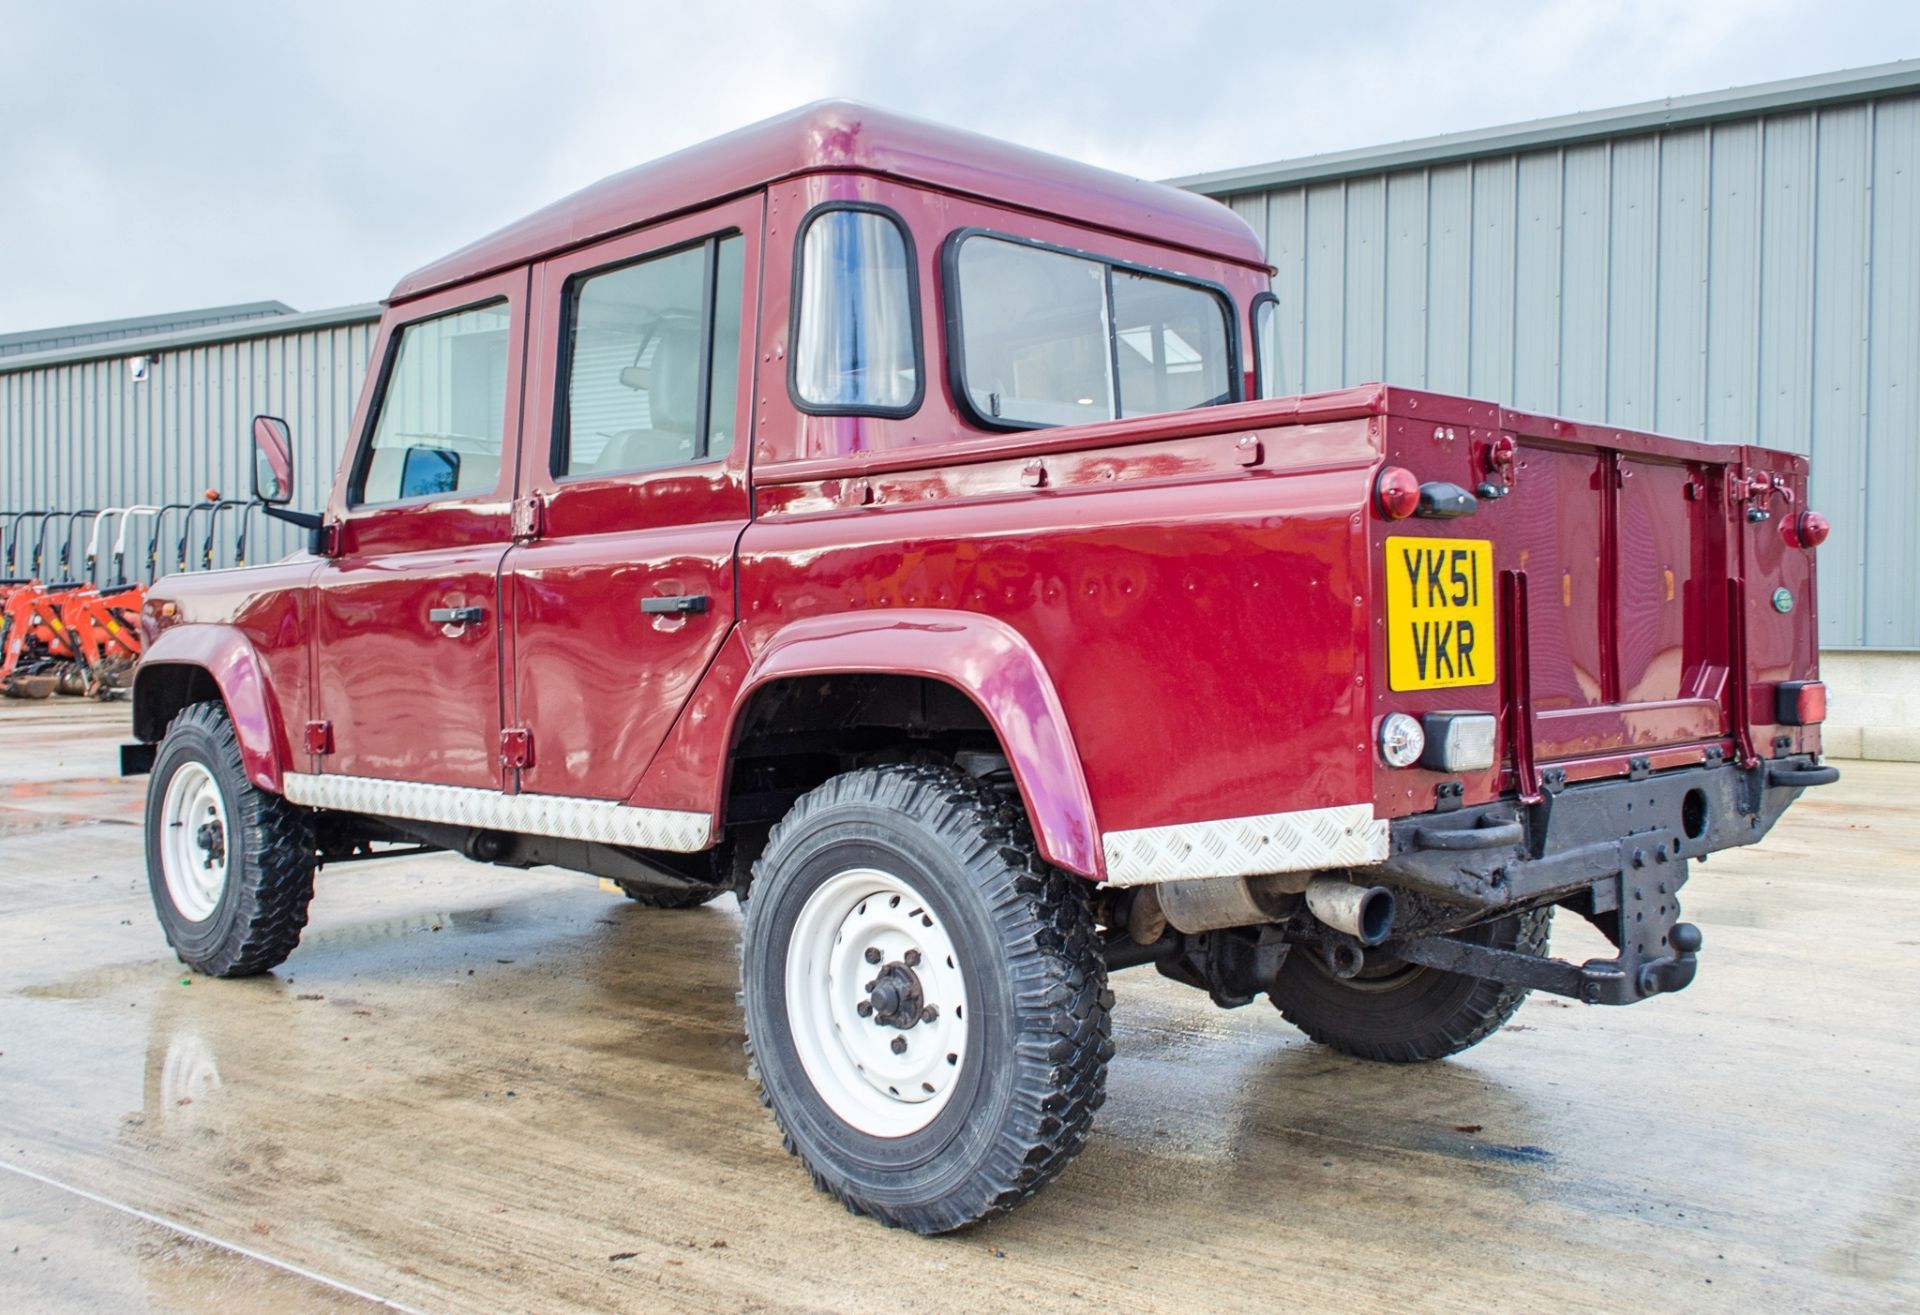 Land Rover Defender 110 County TD5 4x4 double cab pick up Registration Number: YK51 VKR Date of - Image 3 of 29